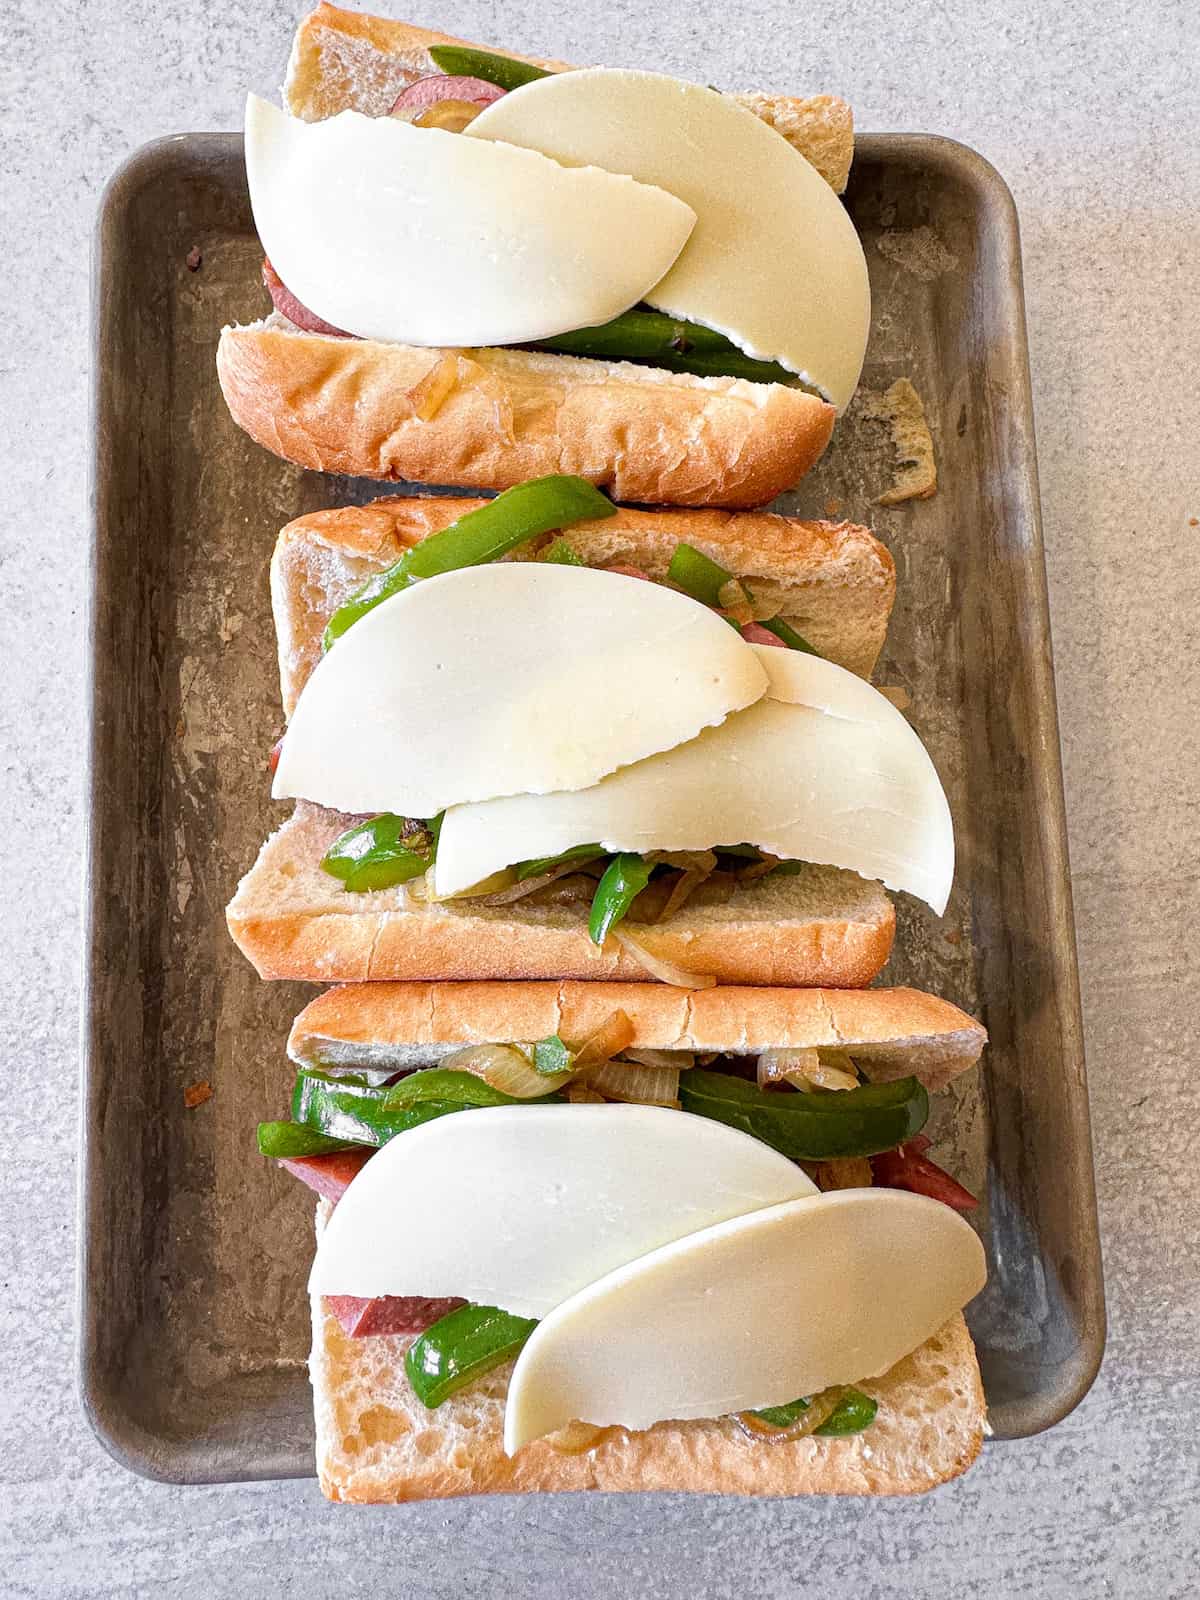 Cheesy sausage sandwiches on a baking pan.